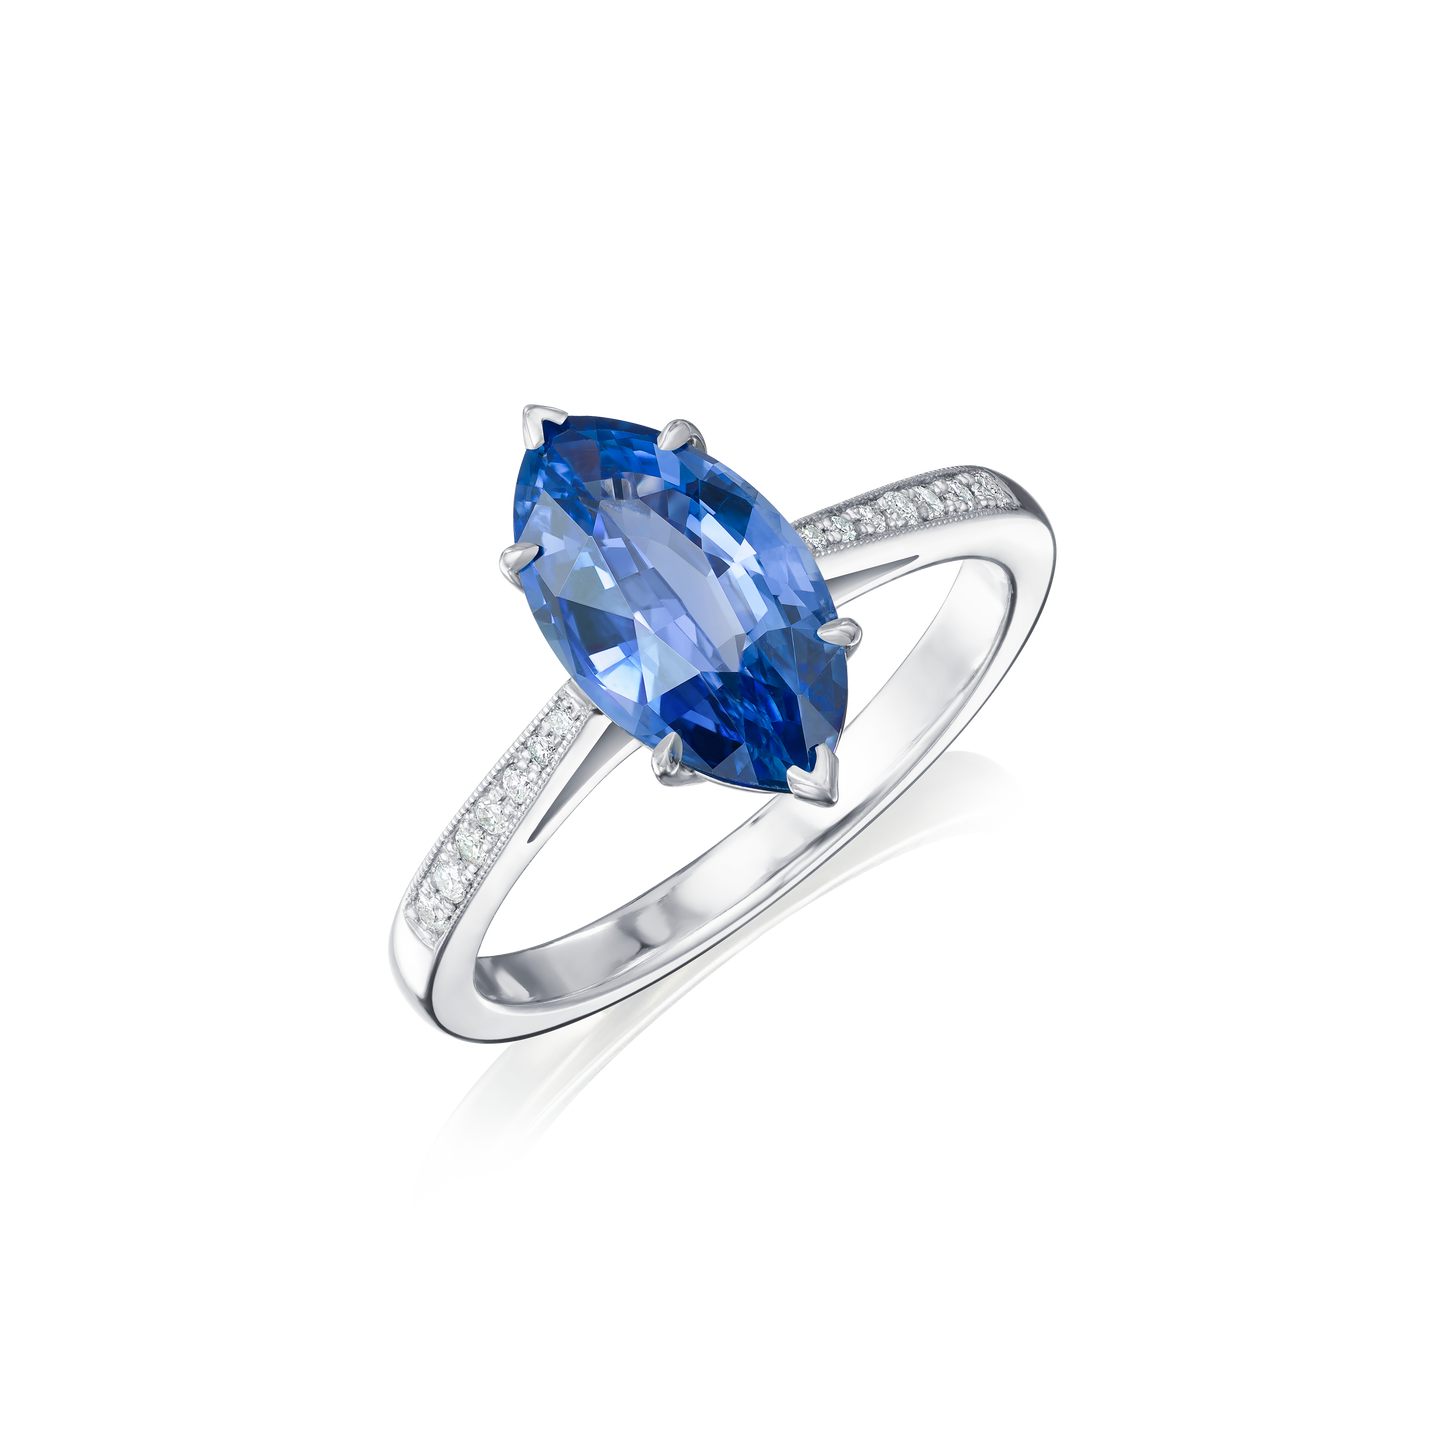 Marquise Cut Sapphire and Diamond Ring